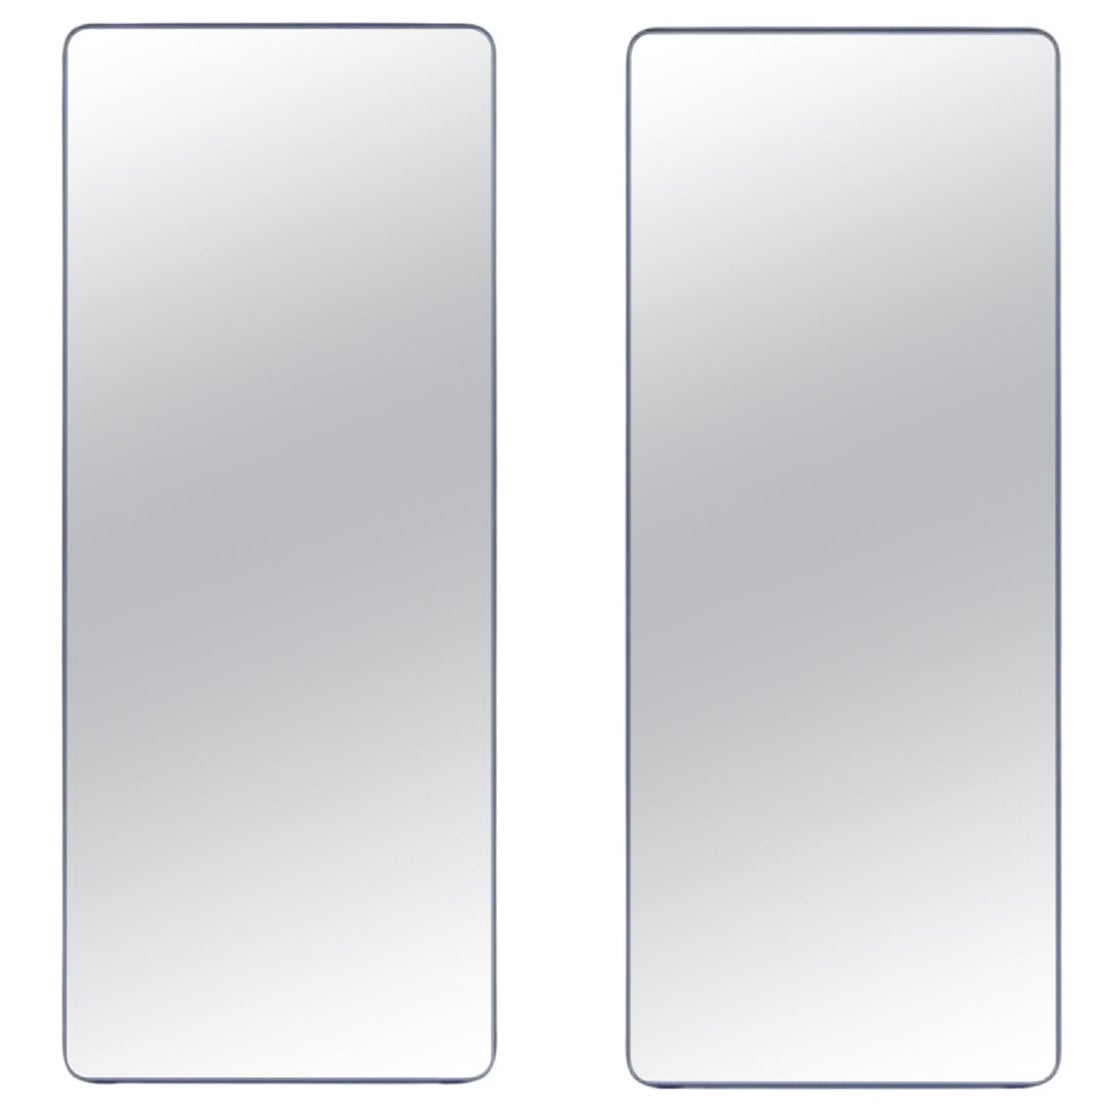 Set of 2 Loveself 05 Mirrors by Oito For Sale